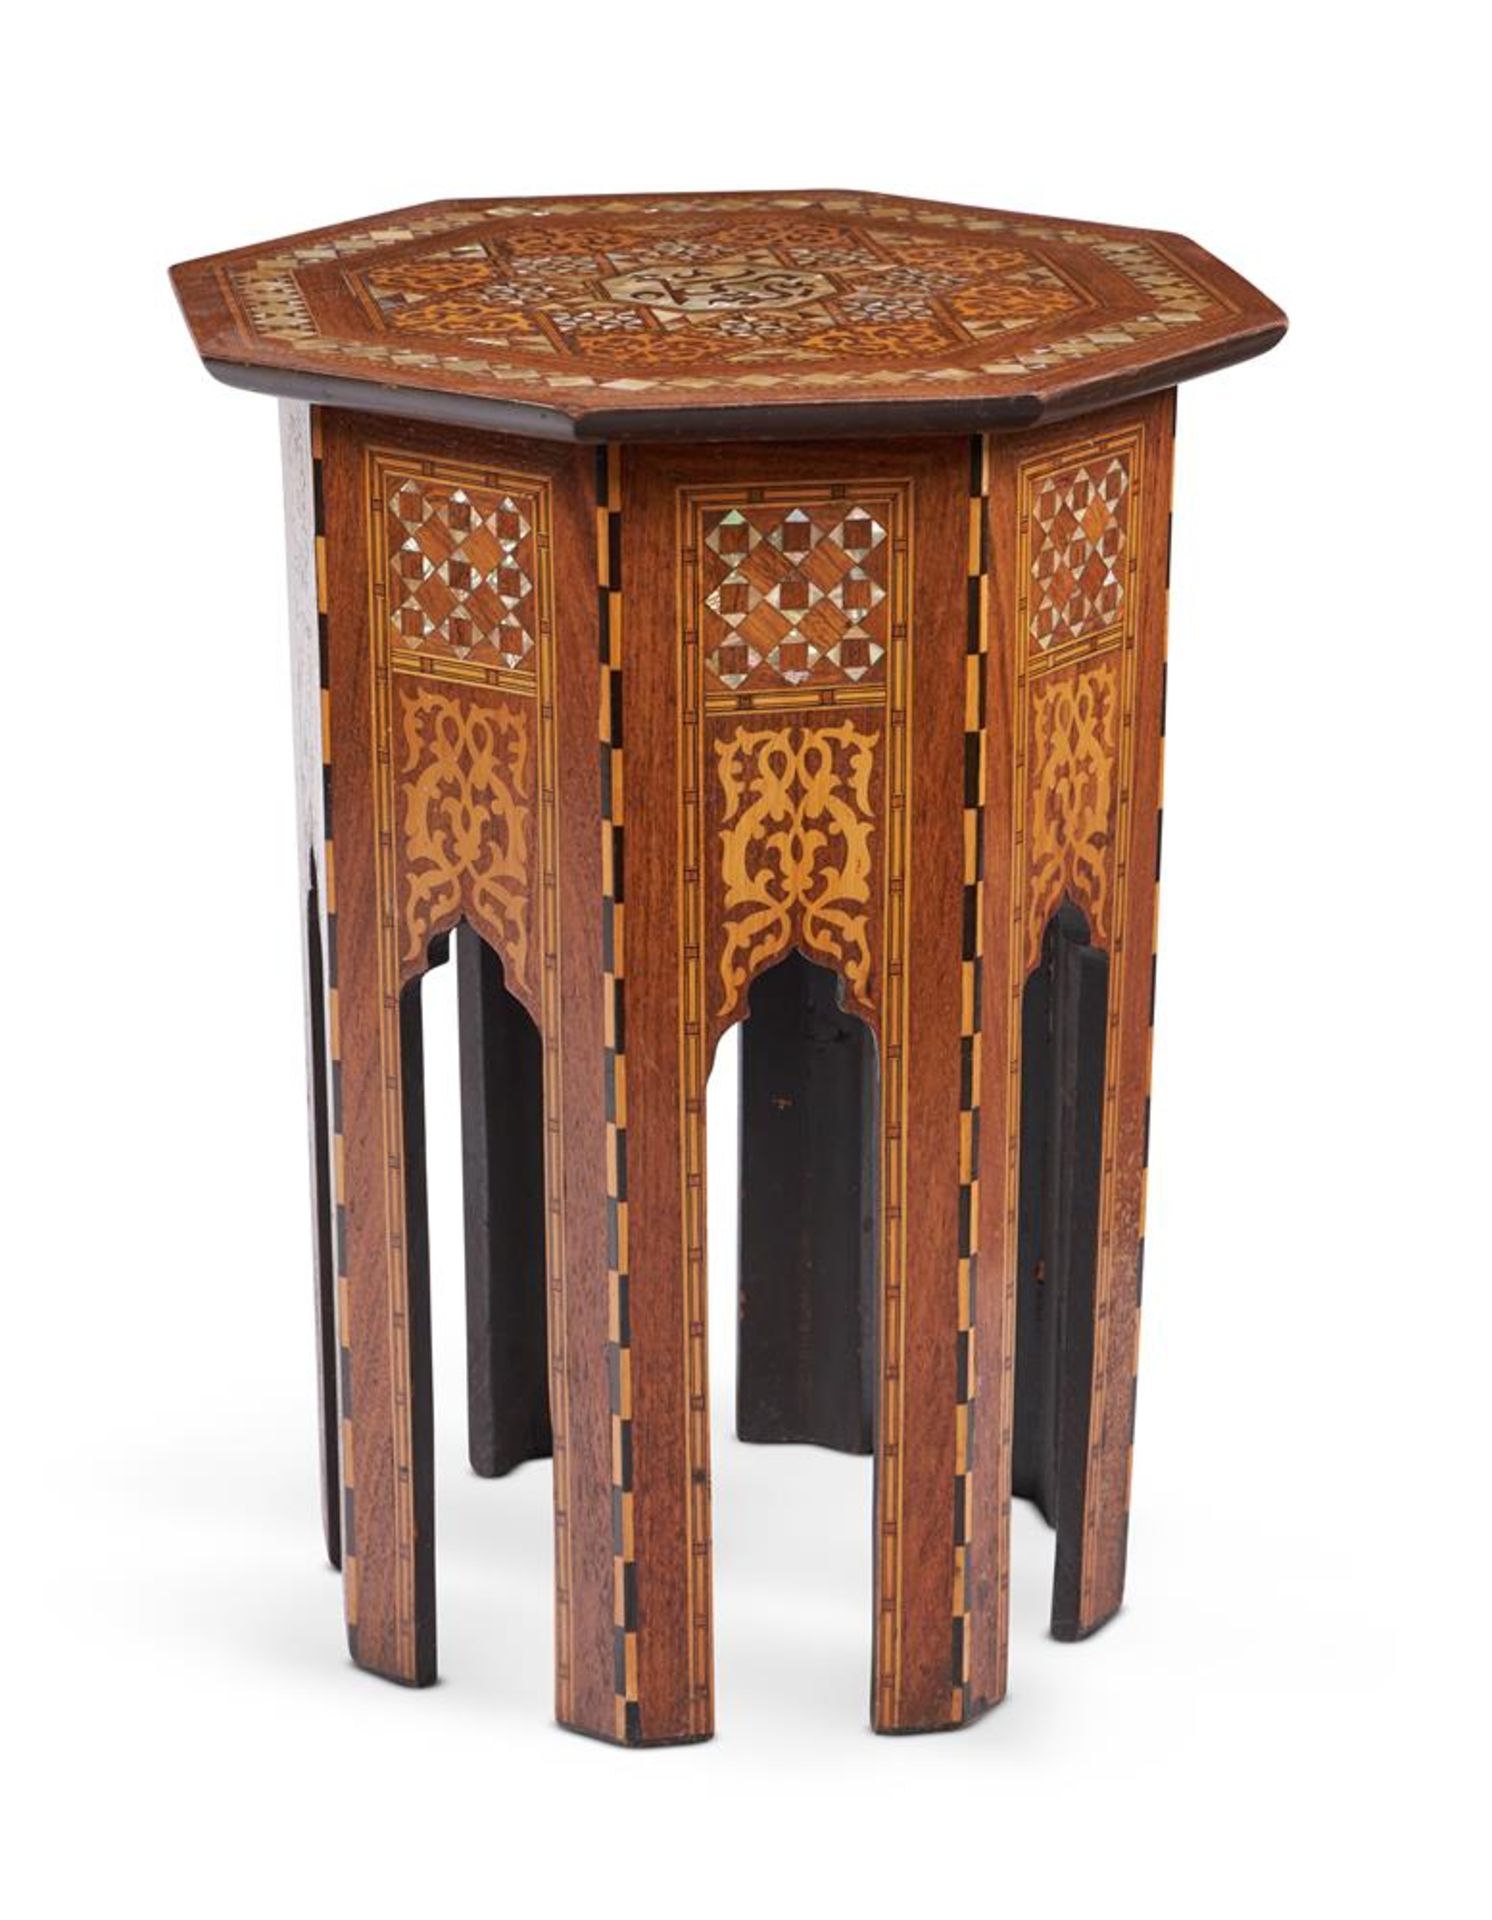 Y A SYRIAN WALNUT AND MOTHER OF PEARL INLAID OCTAGONAL TABLE, SECOND HALF 20TH CENTURY - Image 2 of 2